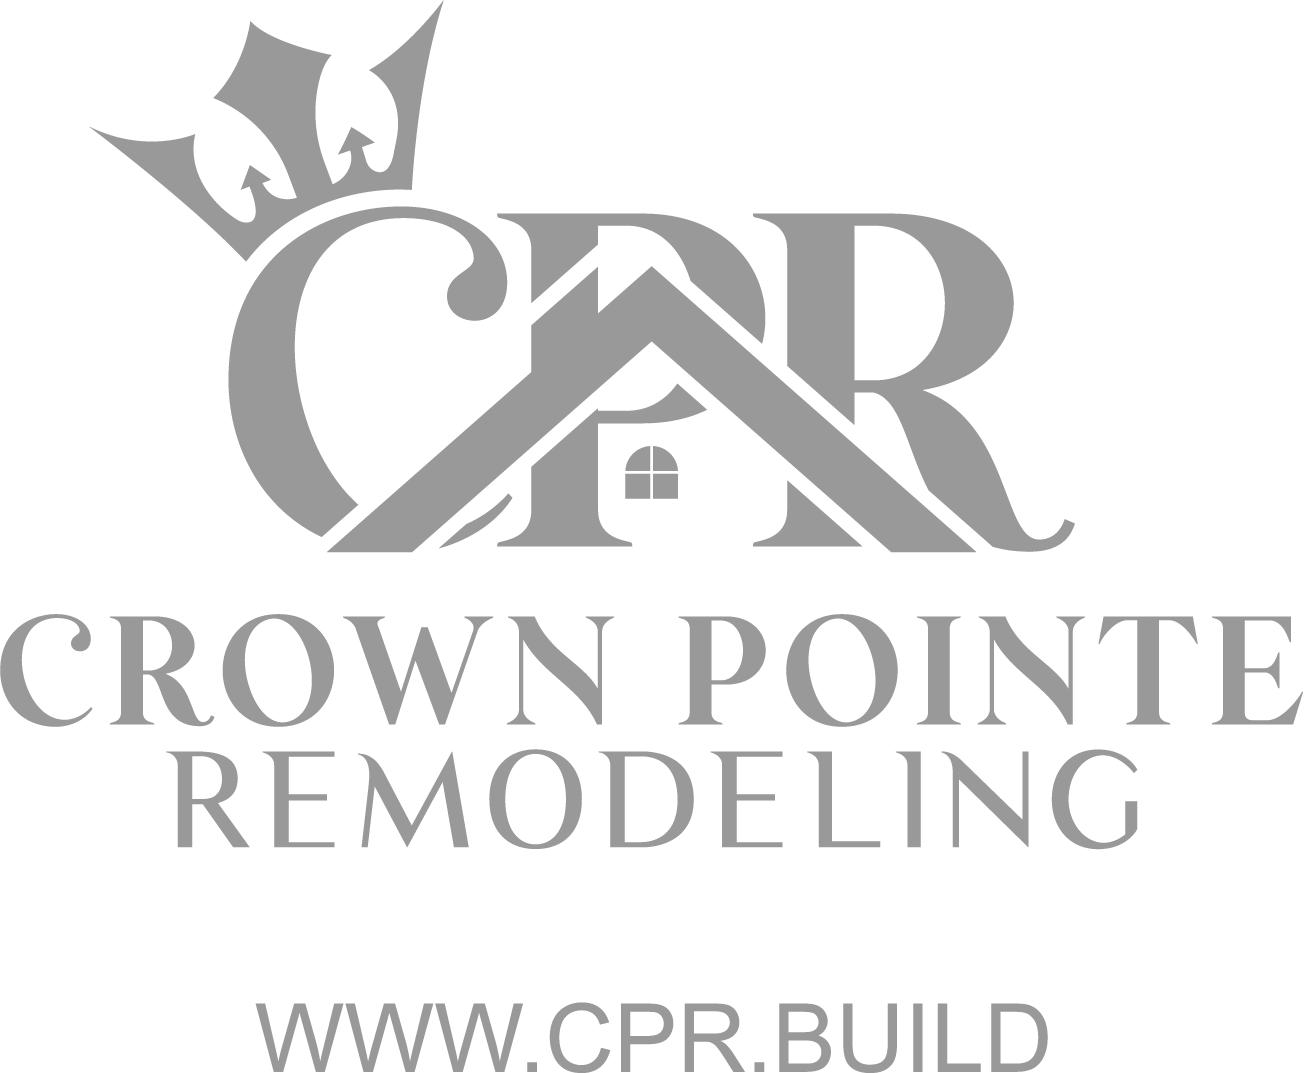 Crown Point Remodeling Black with website address